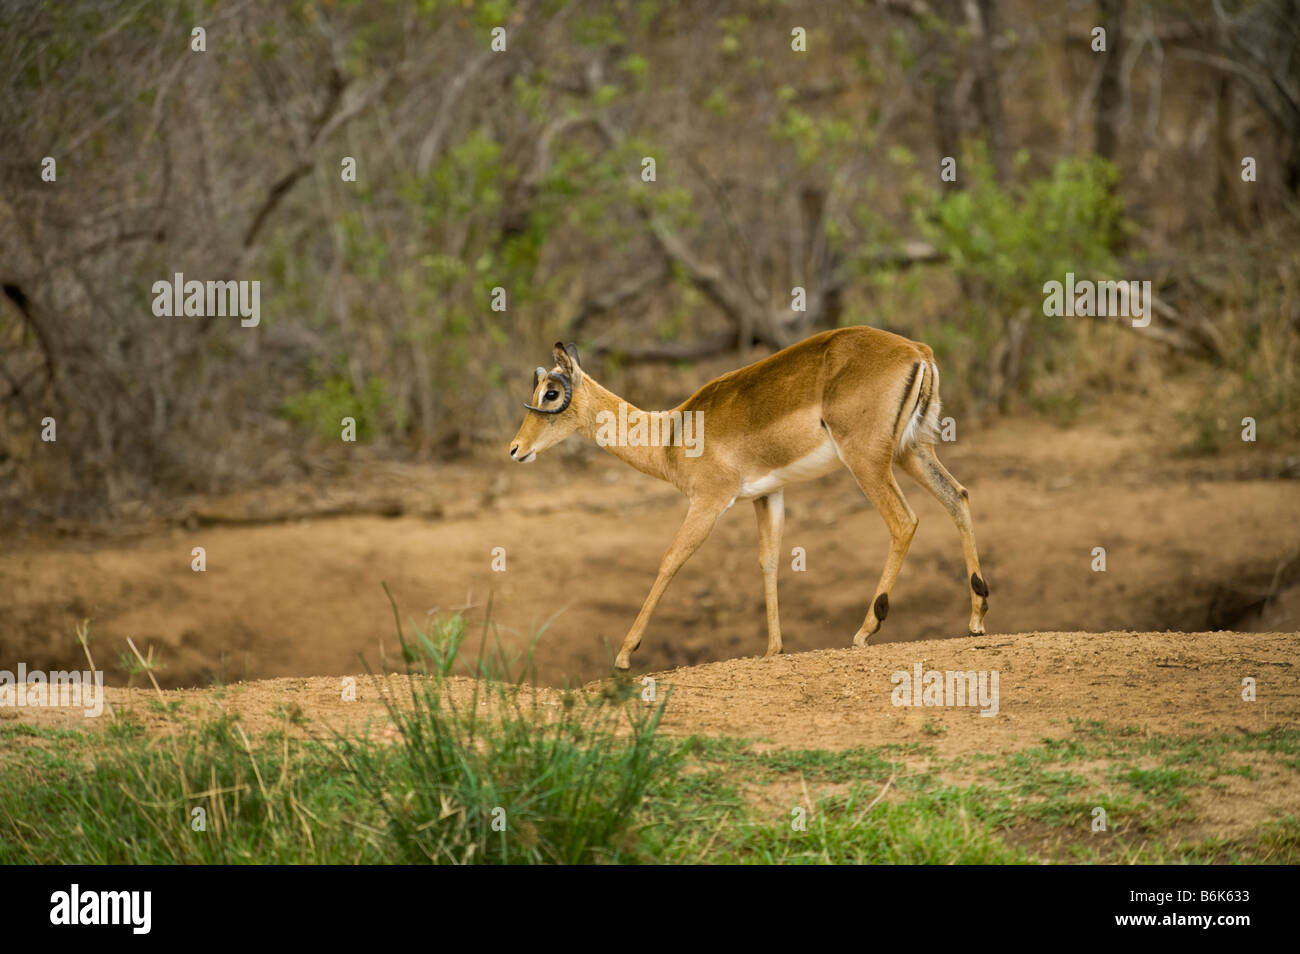 wildlife wild Impala antelope AEPYCEROS MELAMPUS anormal anomalous horn growth figure round anomalousness malformation it is a f Stock Photo